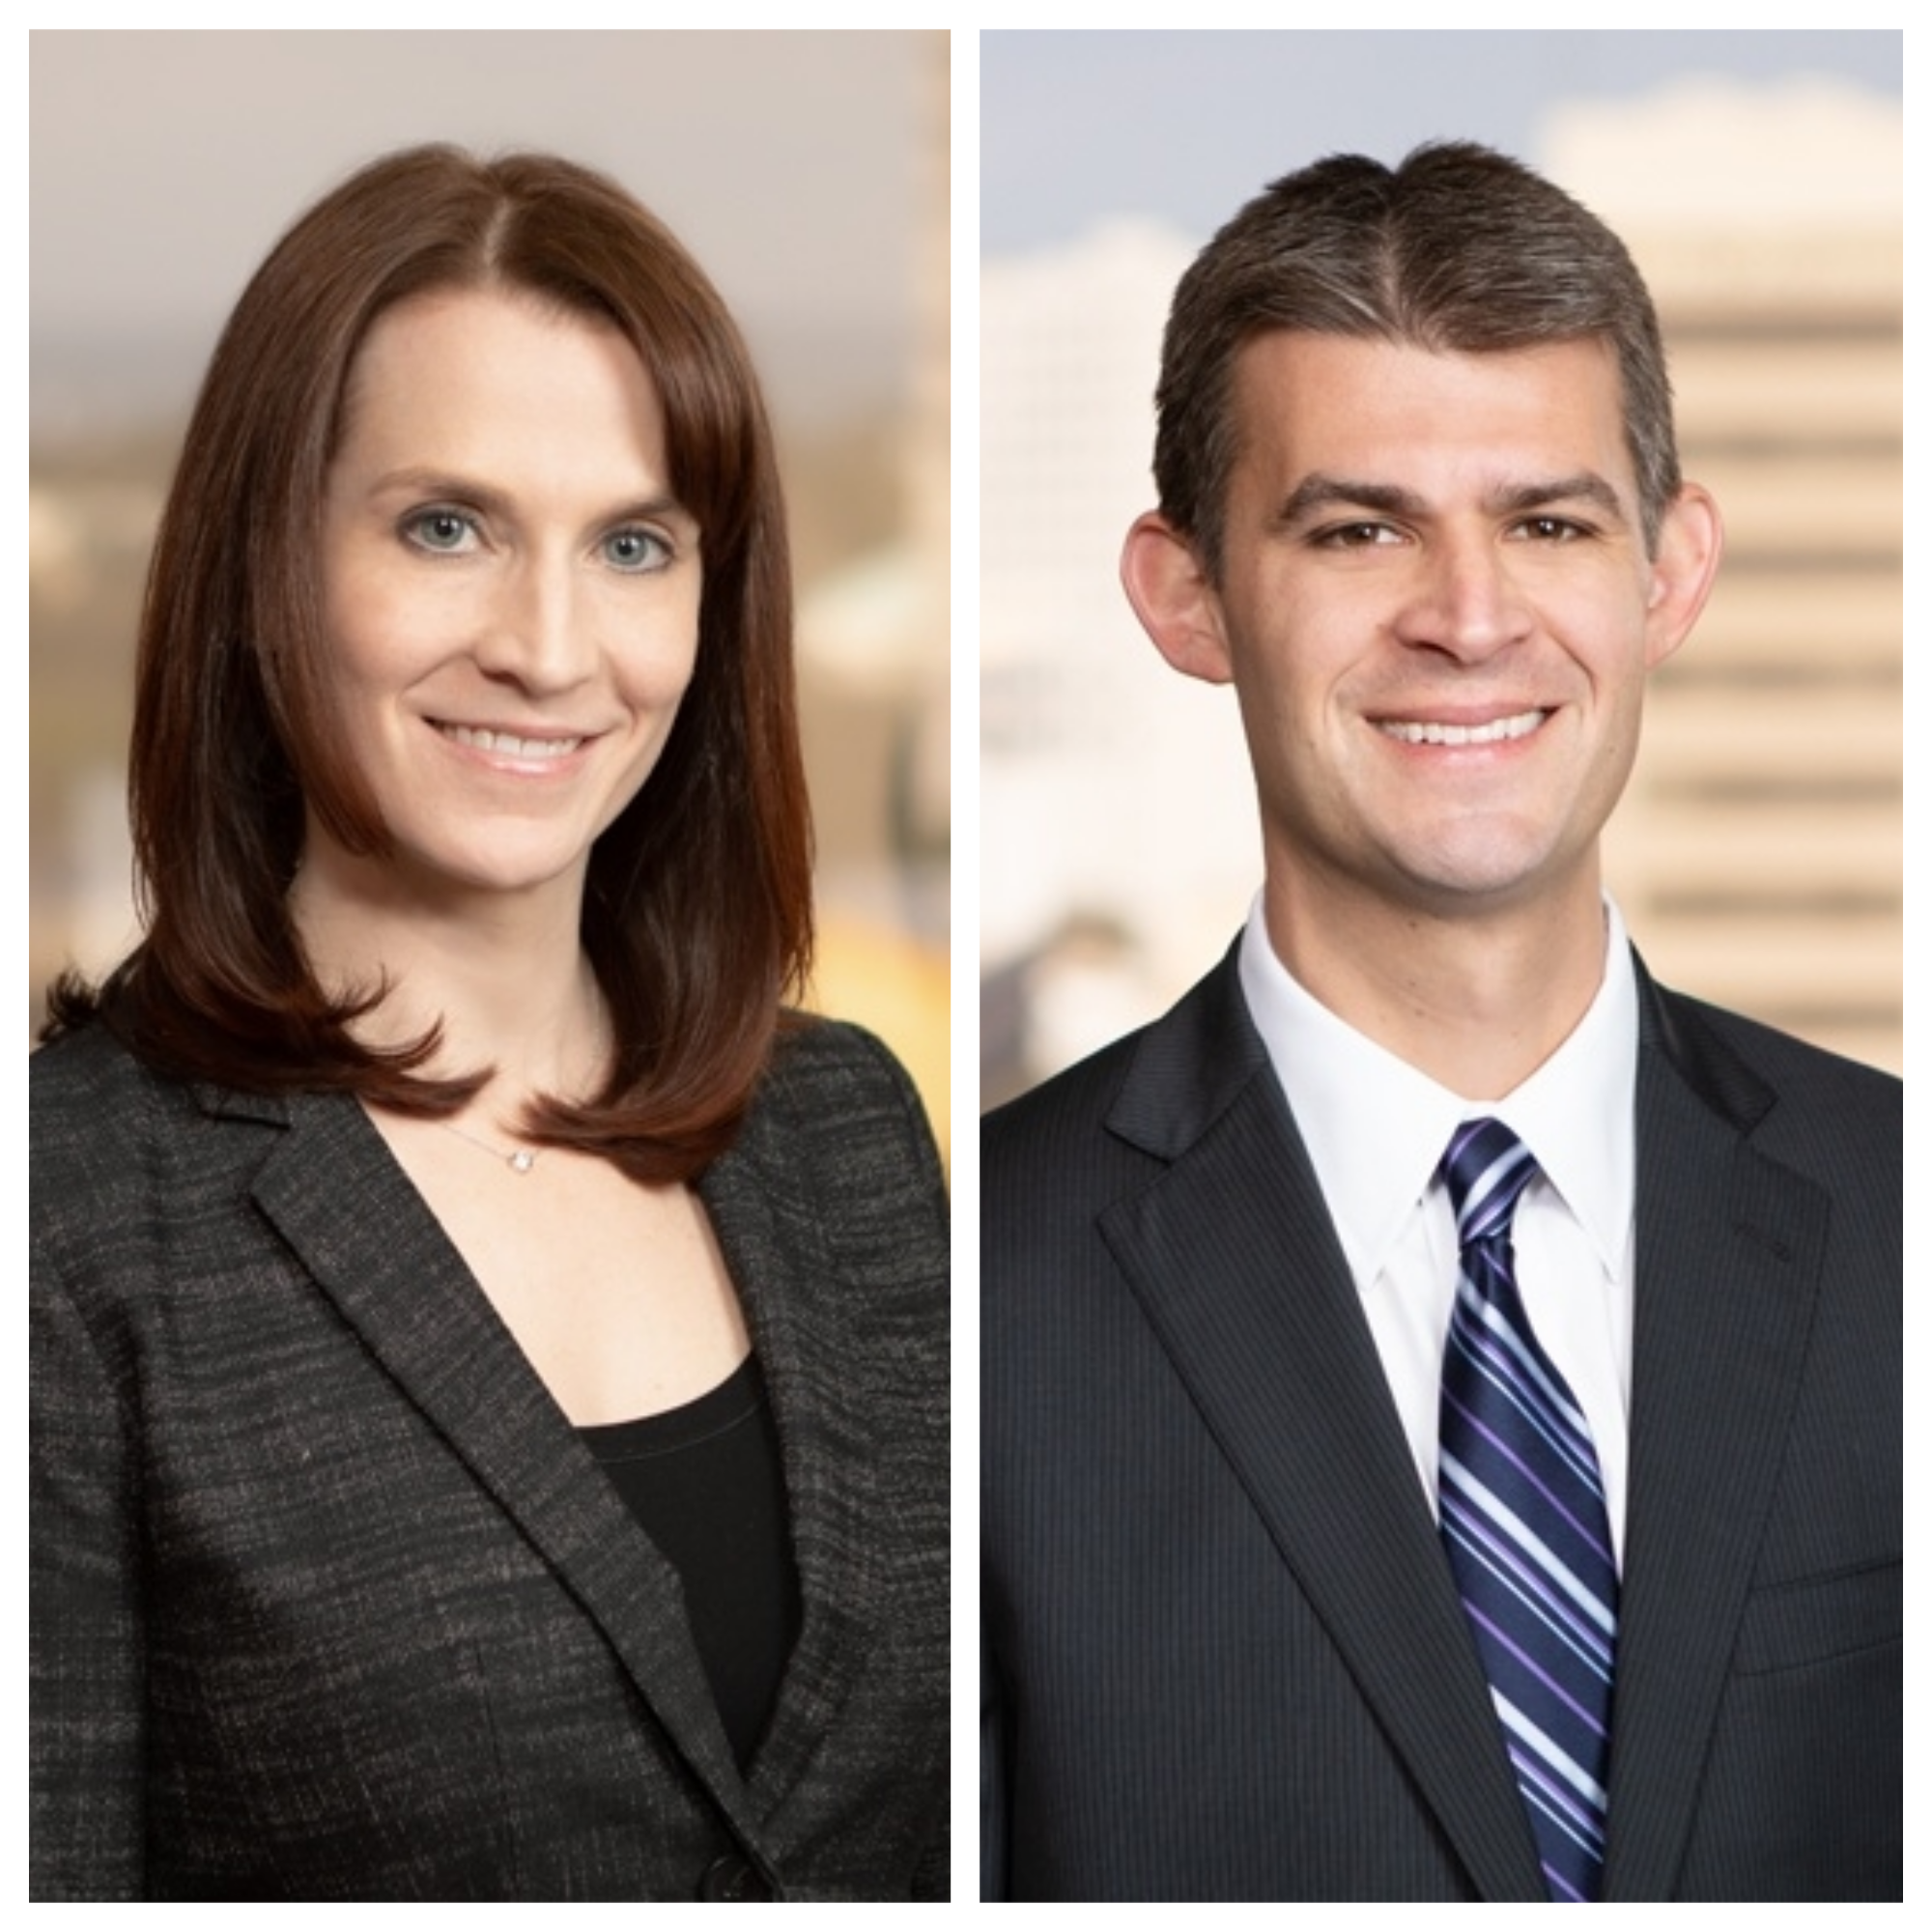 Sarasota Lawyers Meghan Serrano and Brett Henson to Present CLE Course for the Florida Bar Real Property, Probate and Trust Law Section